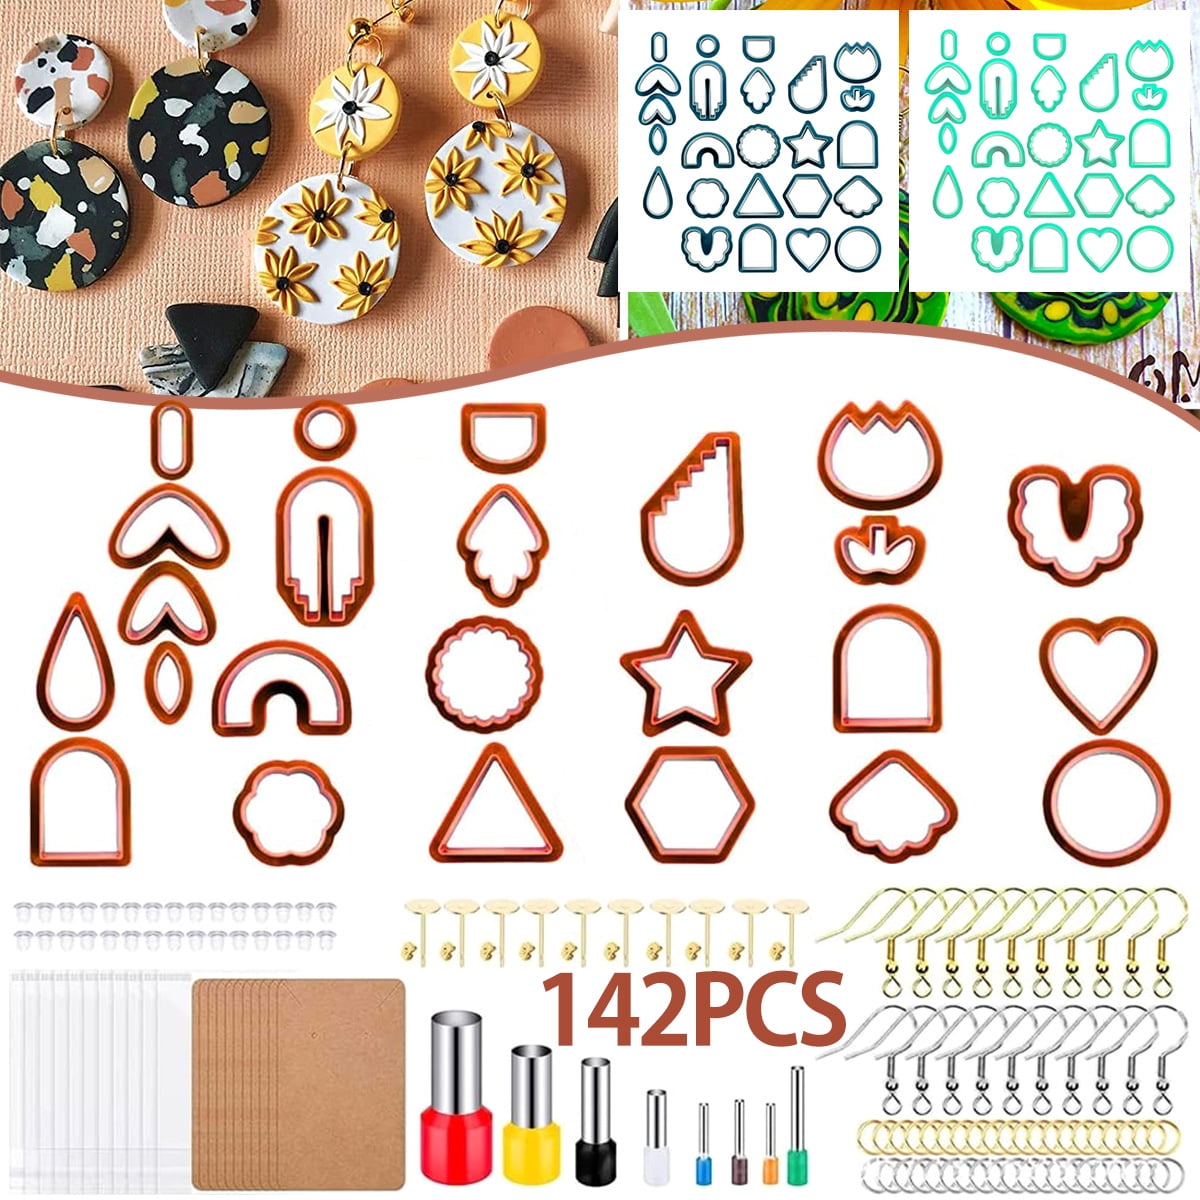 Polymer Clay Cutters Set,24 Shapes Clay Cutters with 118 Earrings